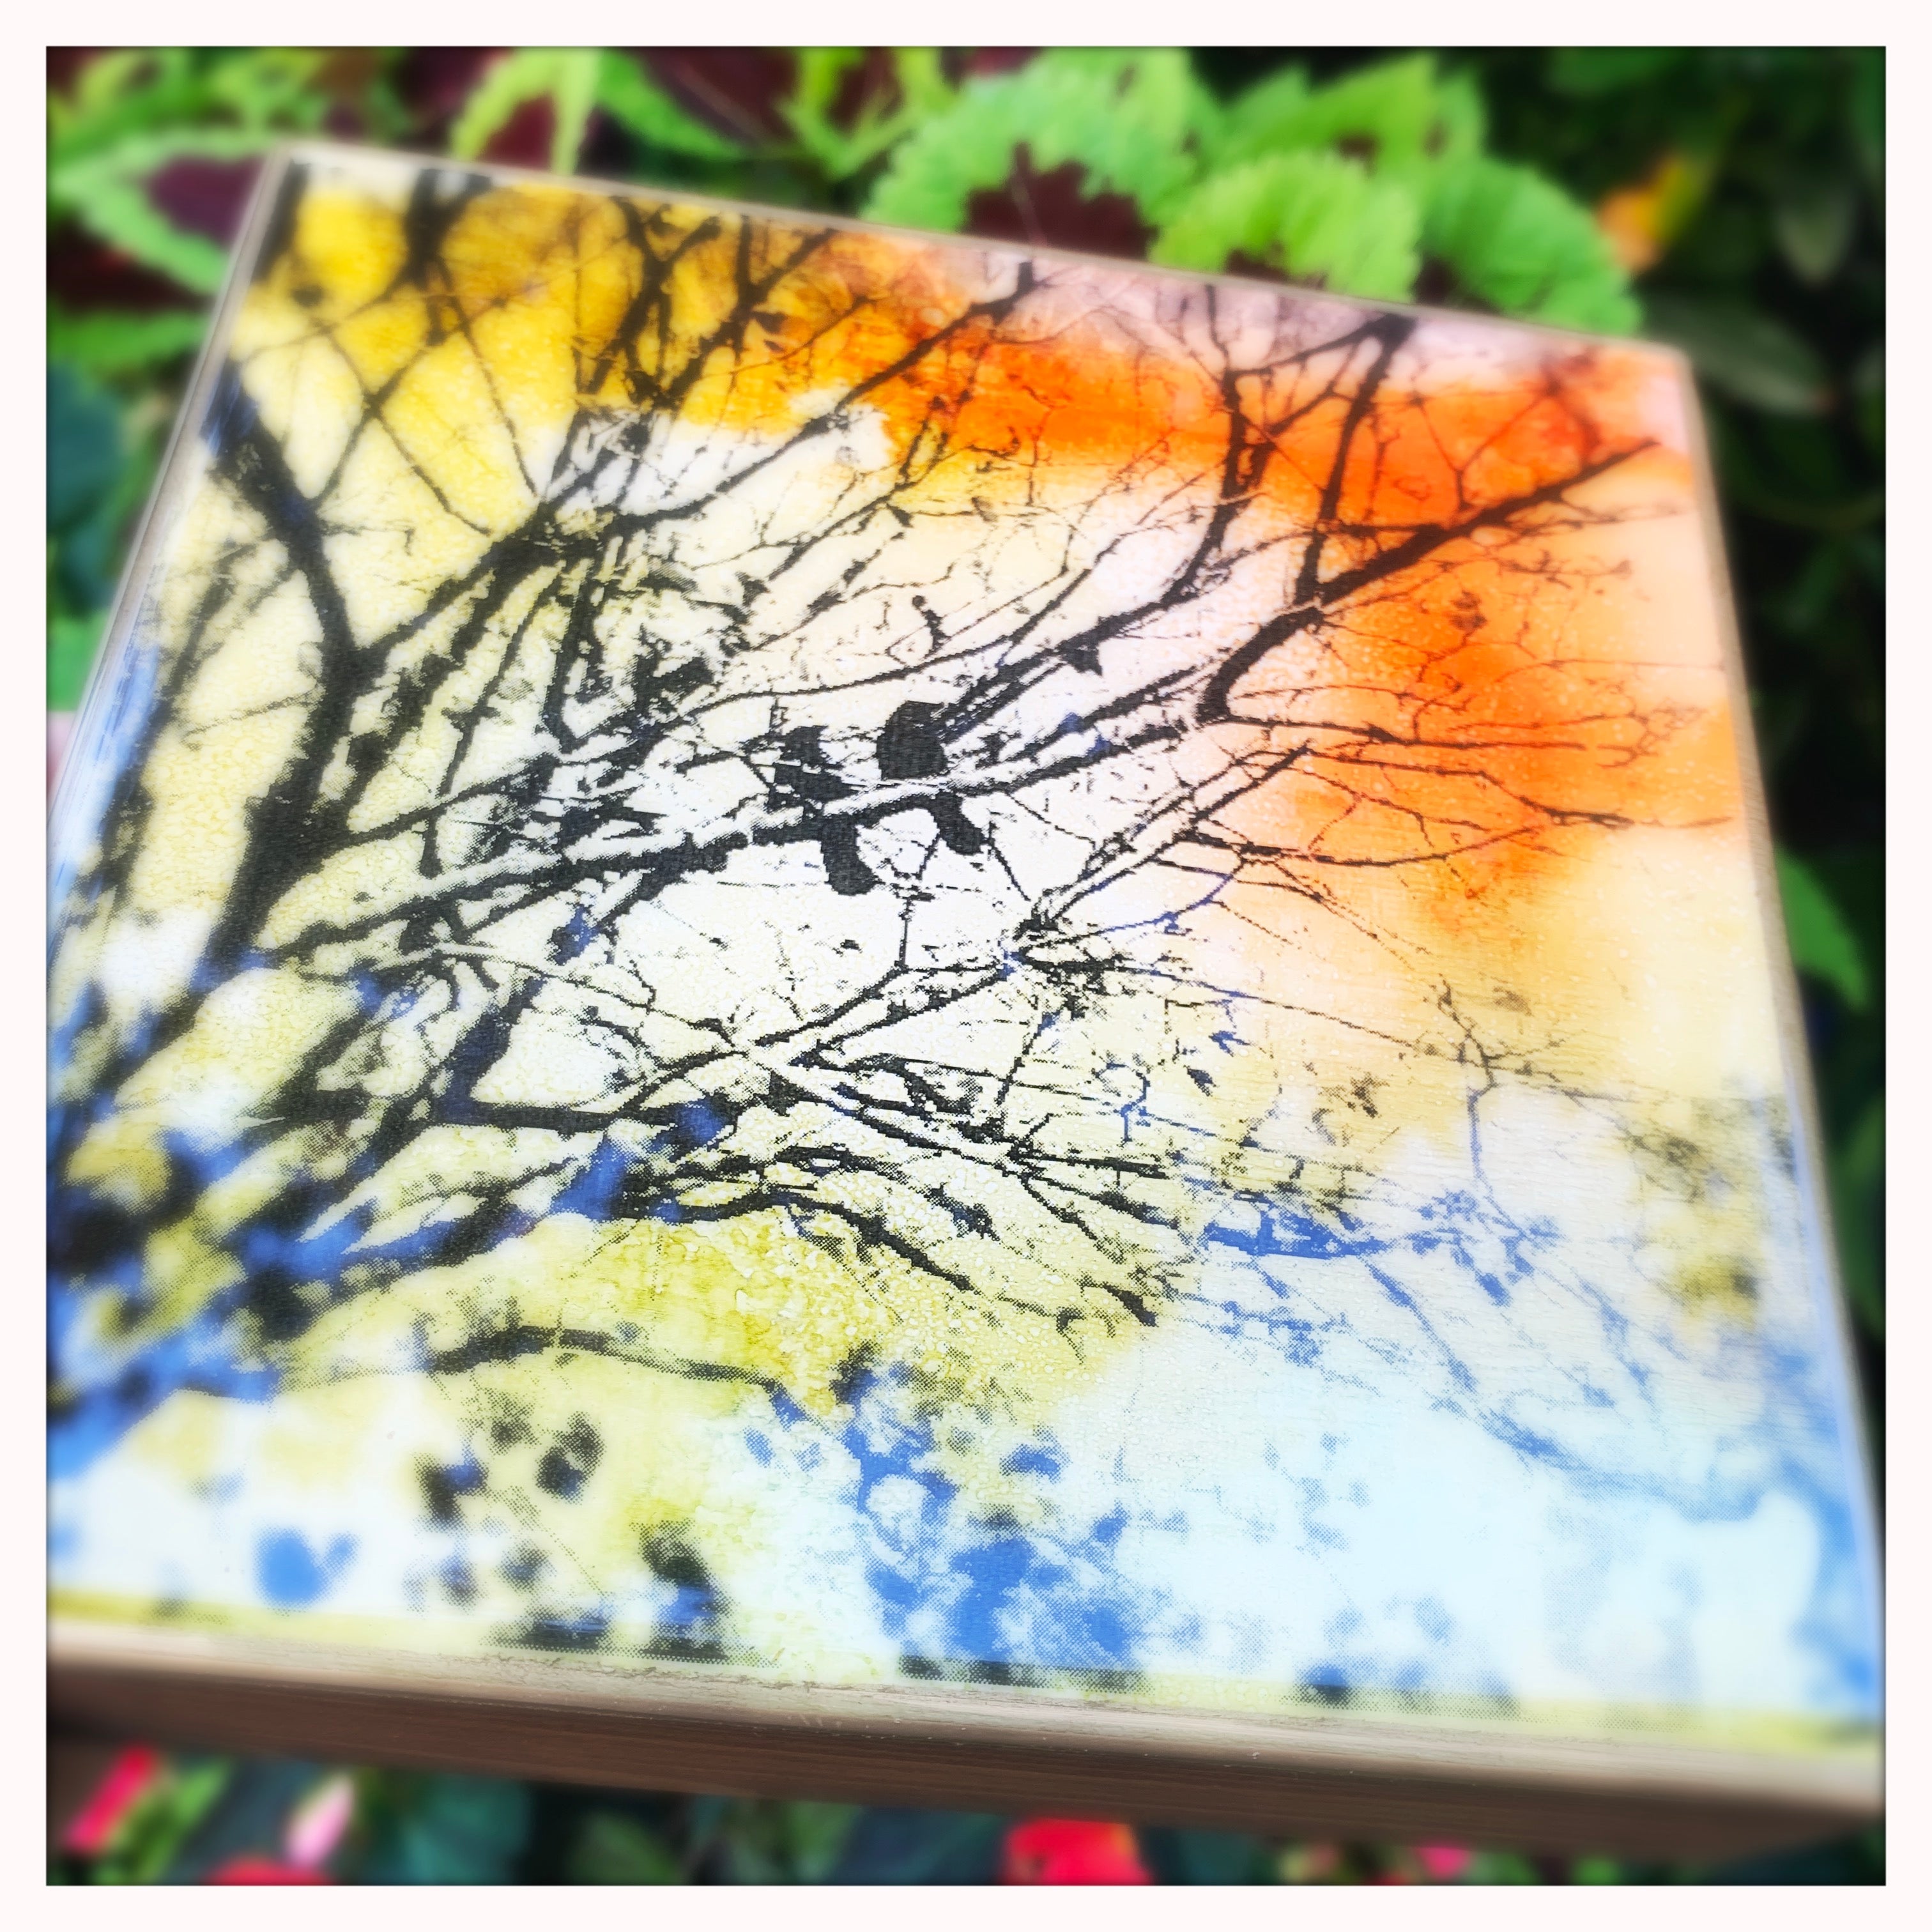 6 x 6 inches - 2 Birds in a Tree - Ambleside